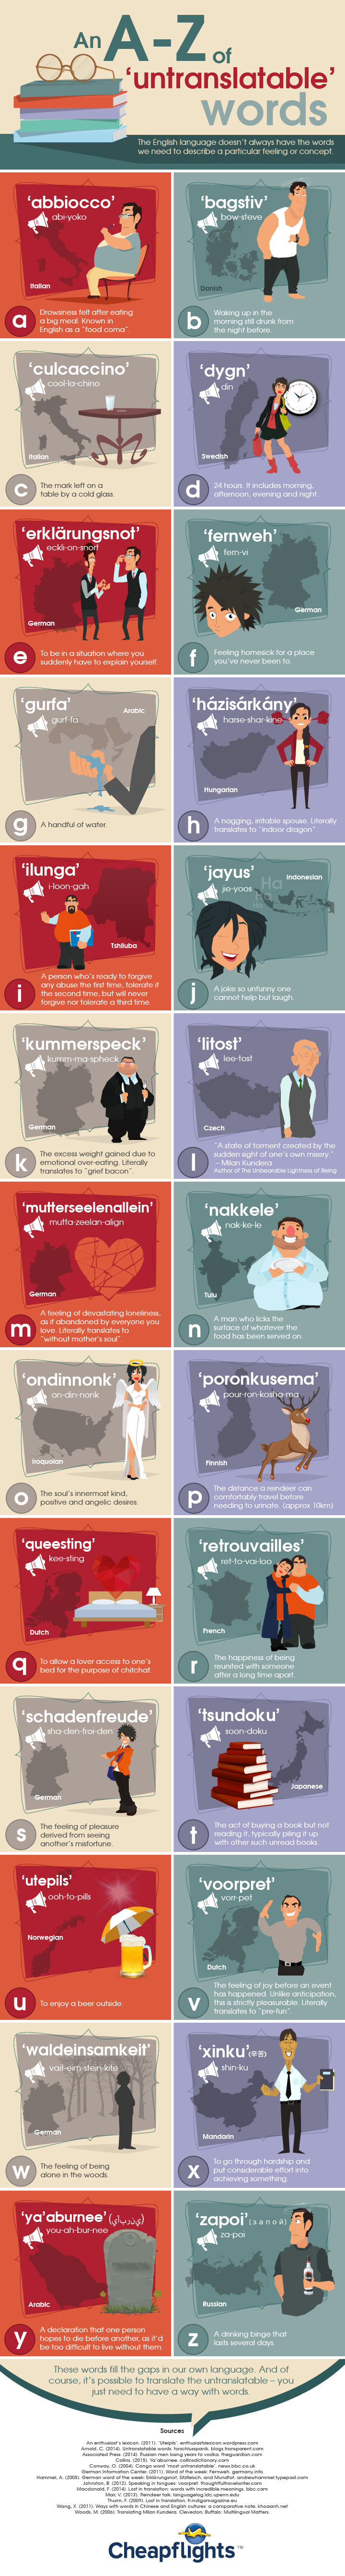 An A-Z of 'Untranslatable' Words